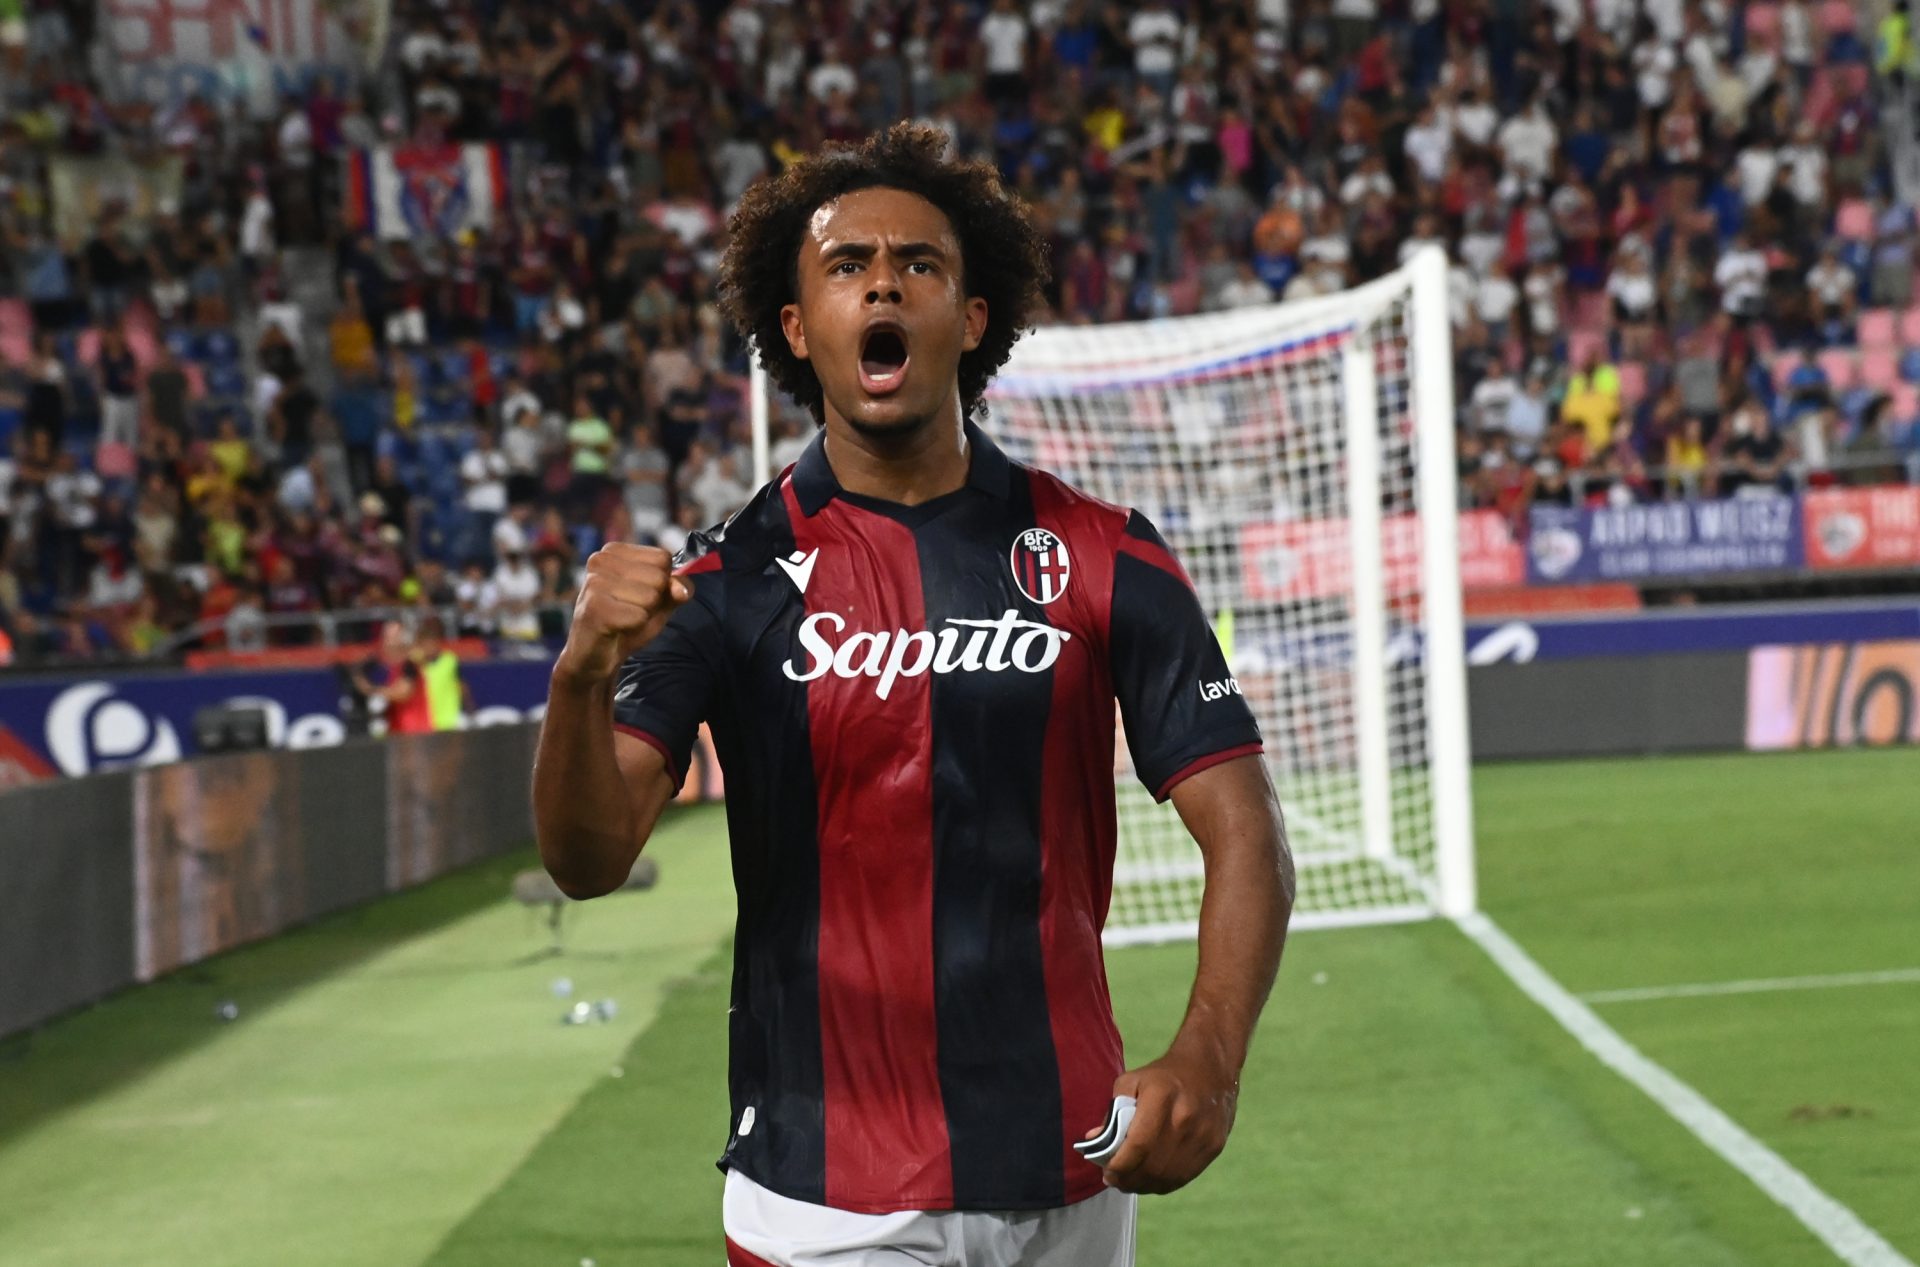 Bologna forward Joshua Zirkzee has opened up on reports linking him to Milan, with the Rossoneri keeping close tabs on his development at the Dall’Ara.